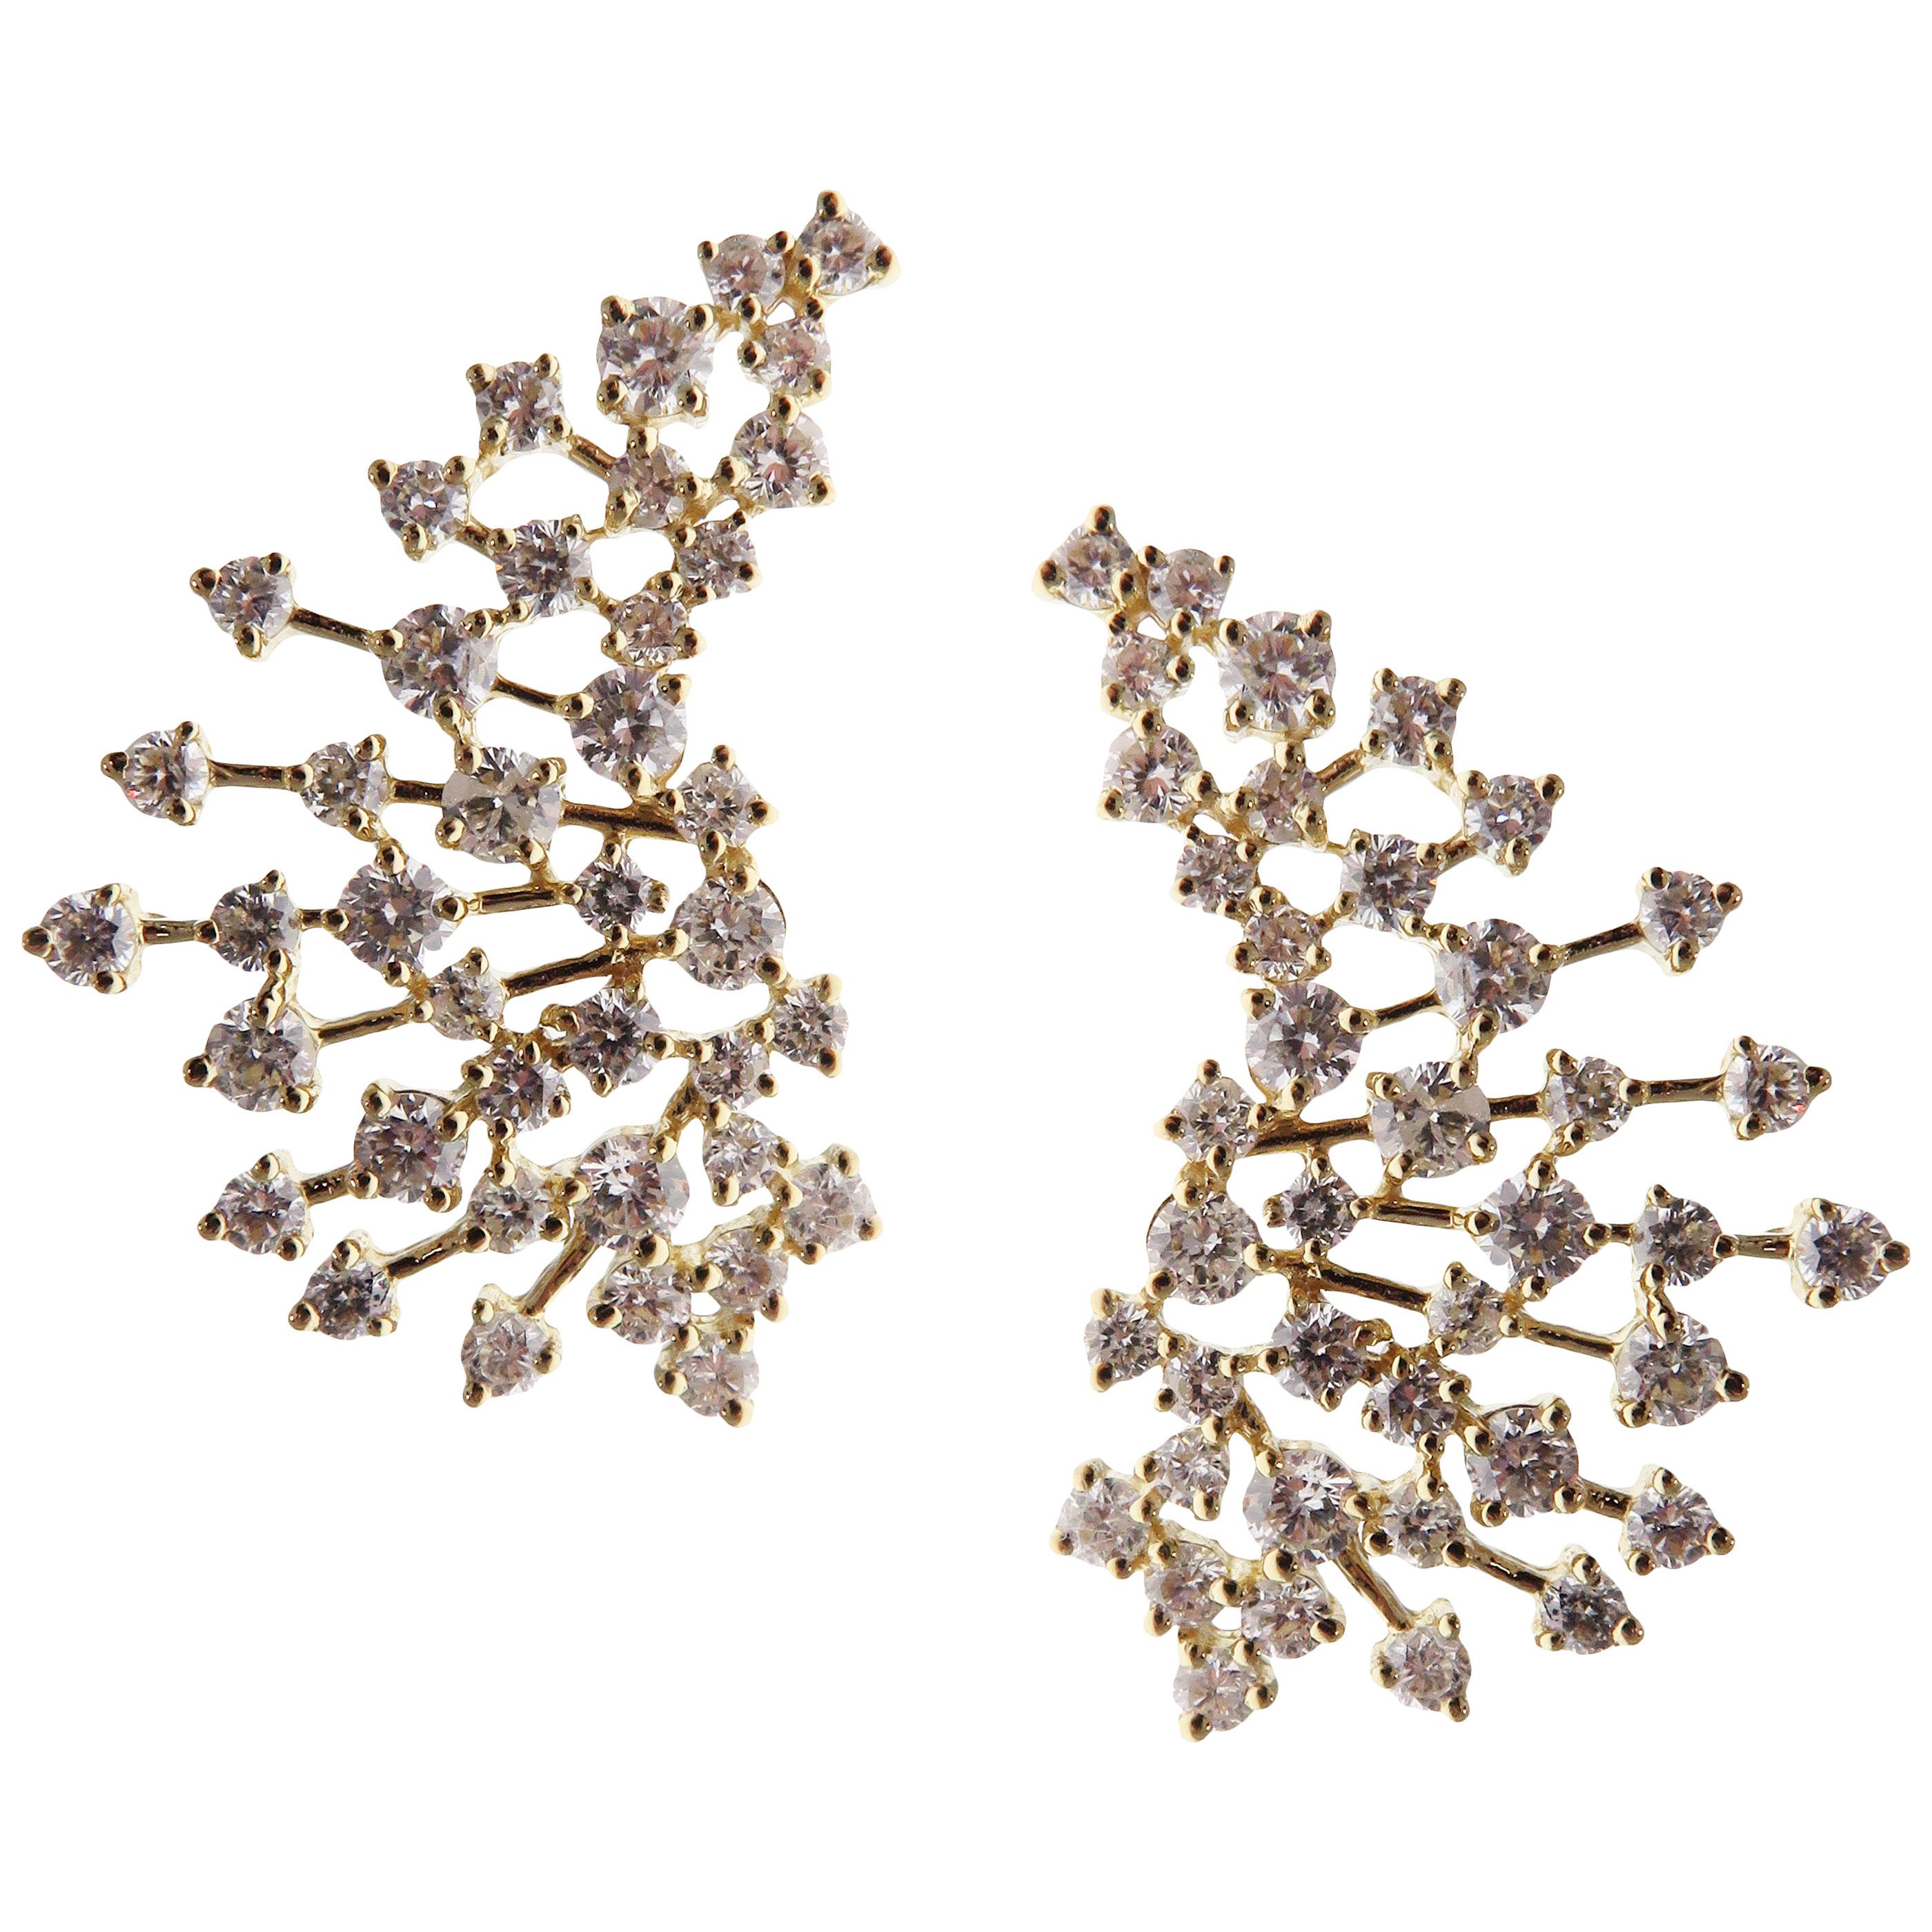 These trendy diamond wing crawler earrings with white diamonds are crafted in 18-karat yellow gold, featuring80 round white diamonds totaling of 3.26 carats.
18-karat white gold are also available upon request.
Approximately 1.05'' inches.
These